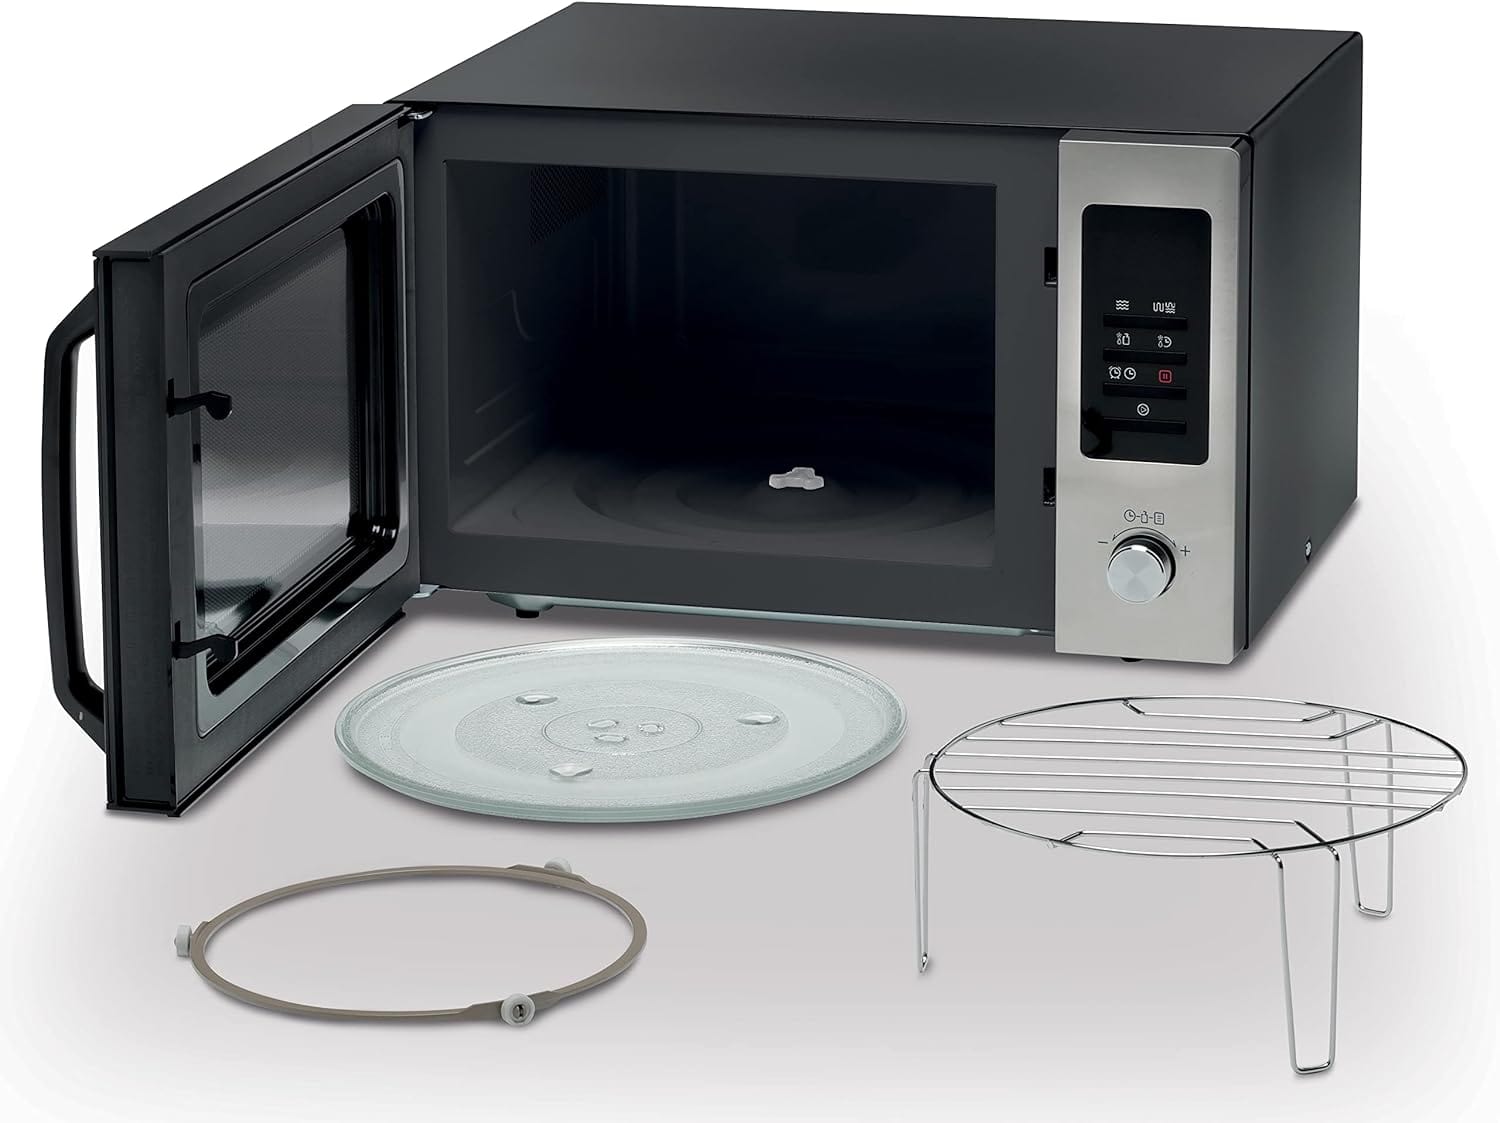 Kenwood 30L Microwave Oven 900W - MWM30 | Supply Master Accra, Ghana Kitchen Appliances Buy Tools hardware Building materials